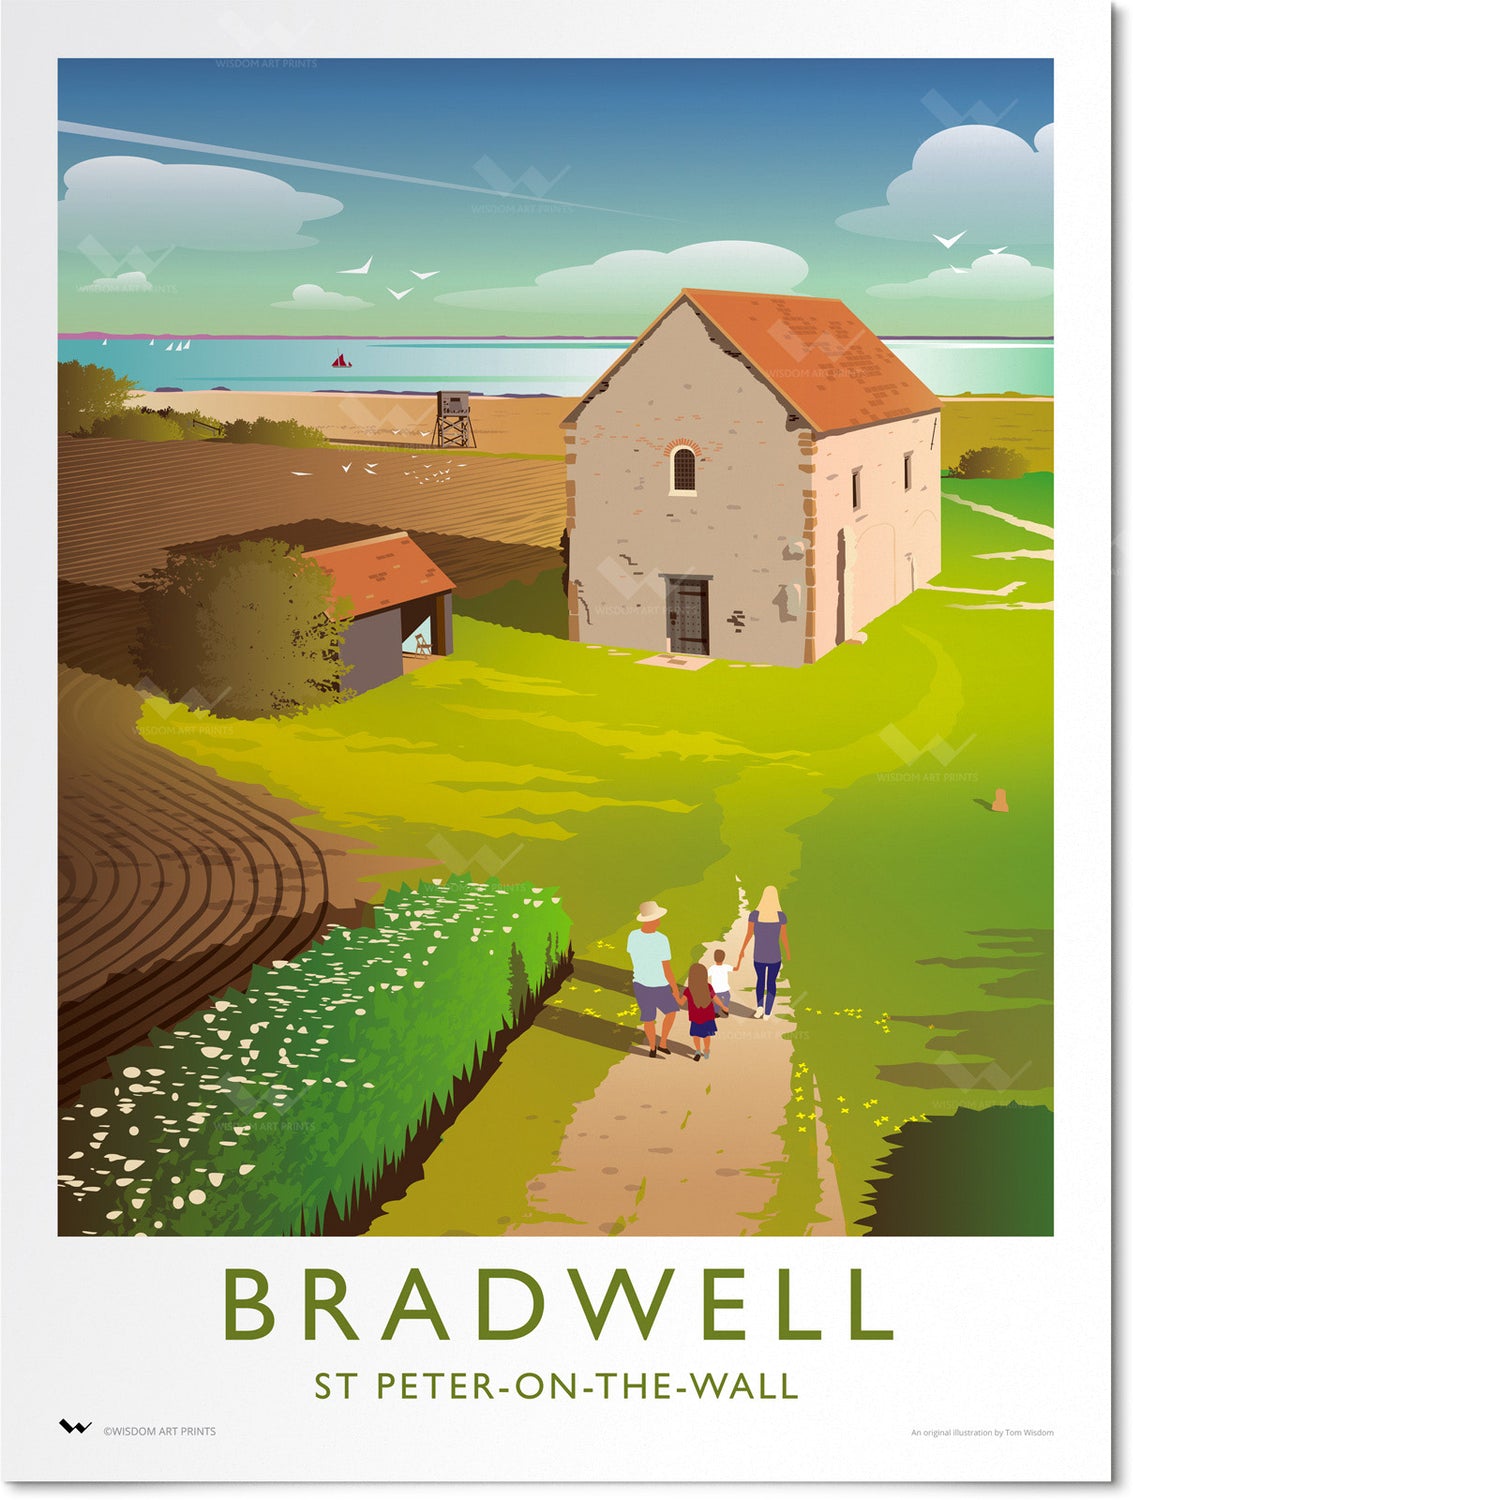 Chapel of St Peter-on-the-Wall, Bradwell Travel Poster